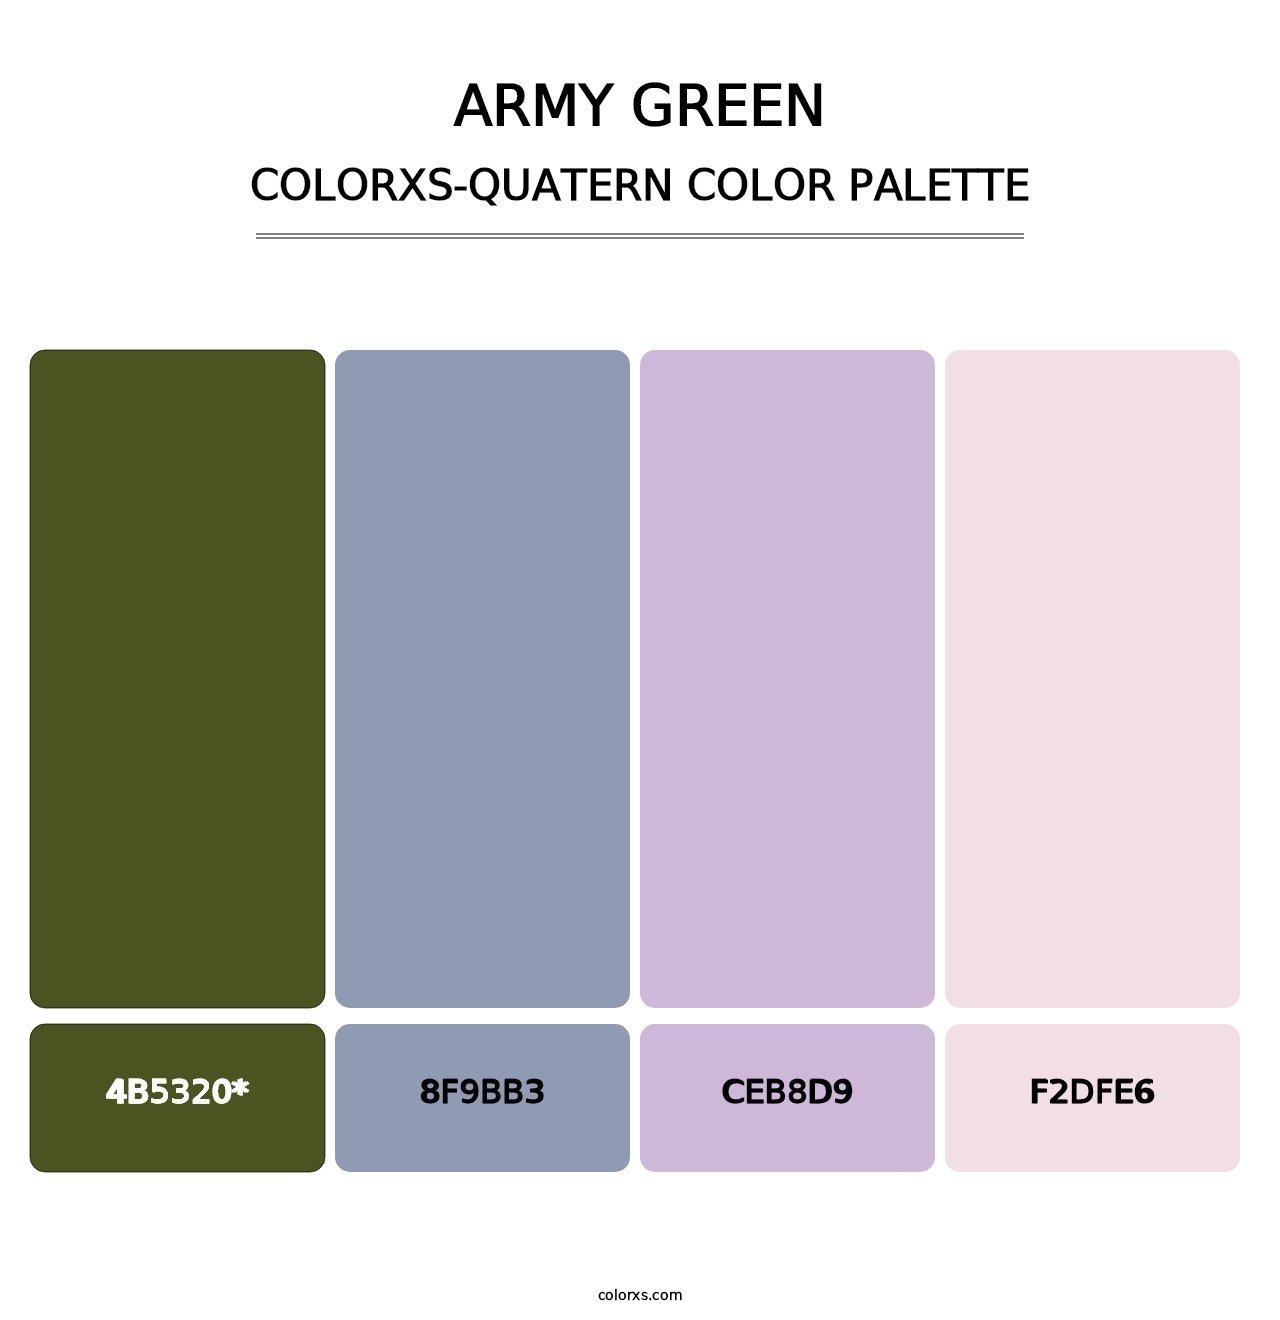 Army Green - Colorxs Quatern Palette